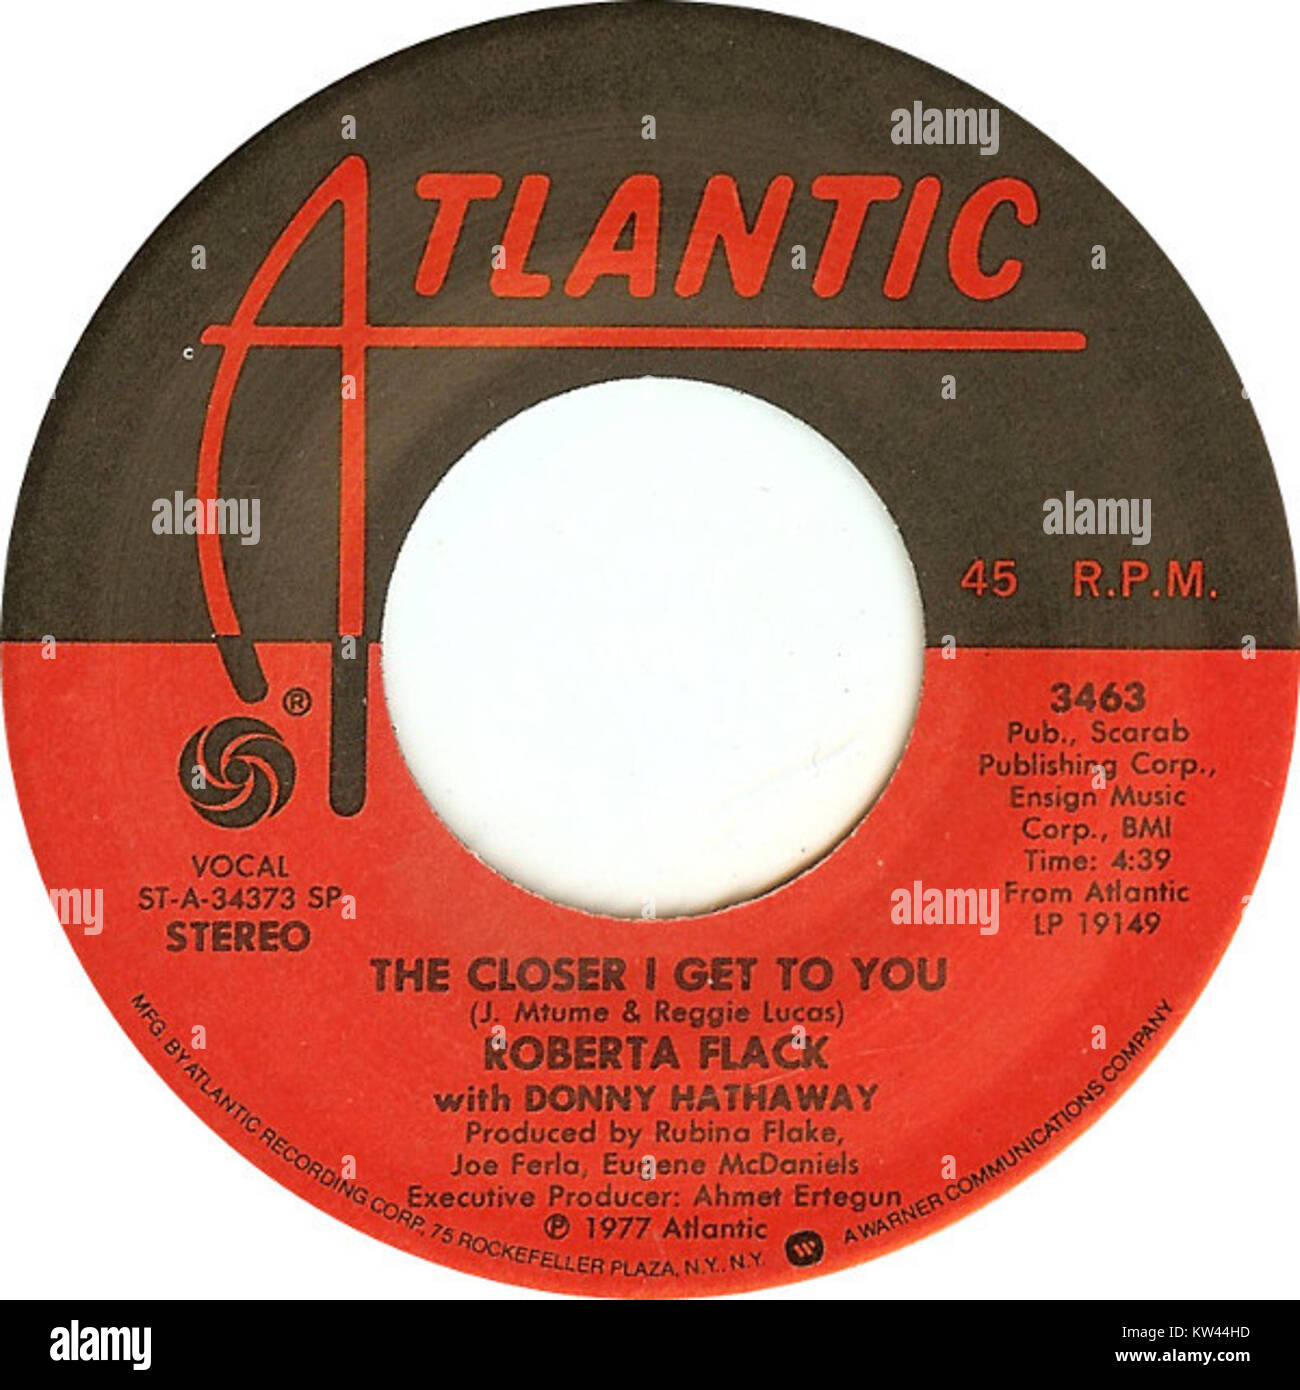 The Close I Get to You by Roberta Flack and Donny Hathaway US vinyl A side label Stock Photo